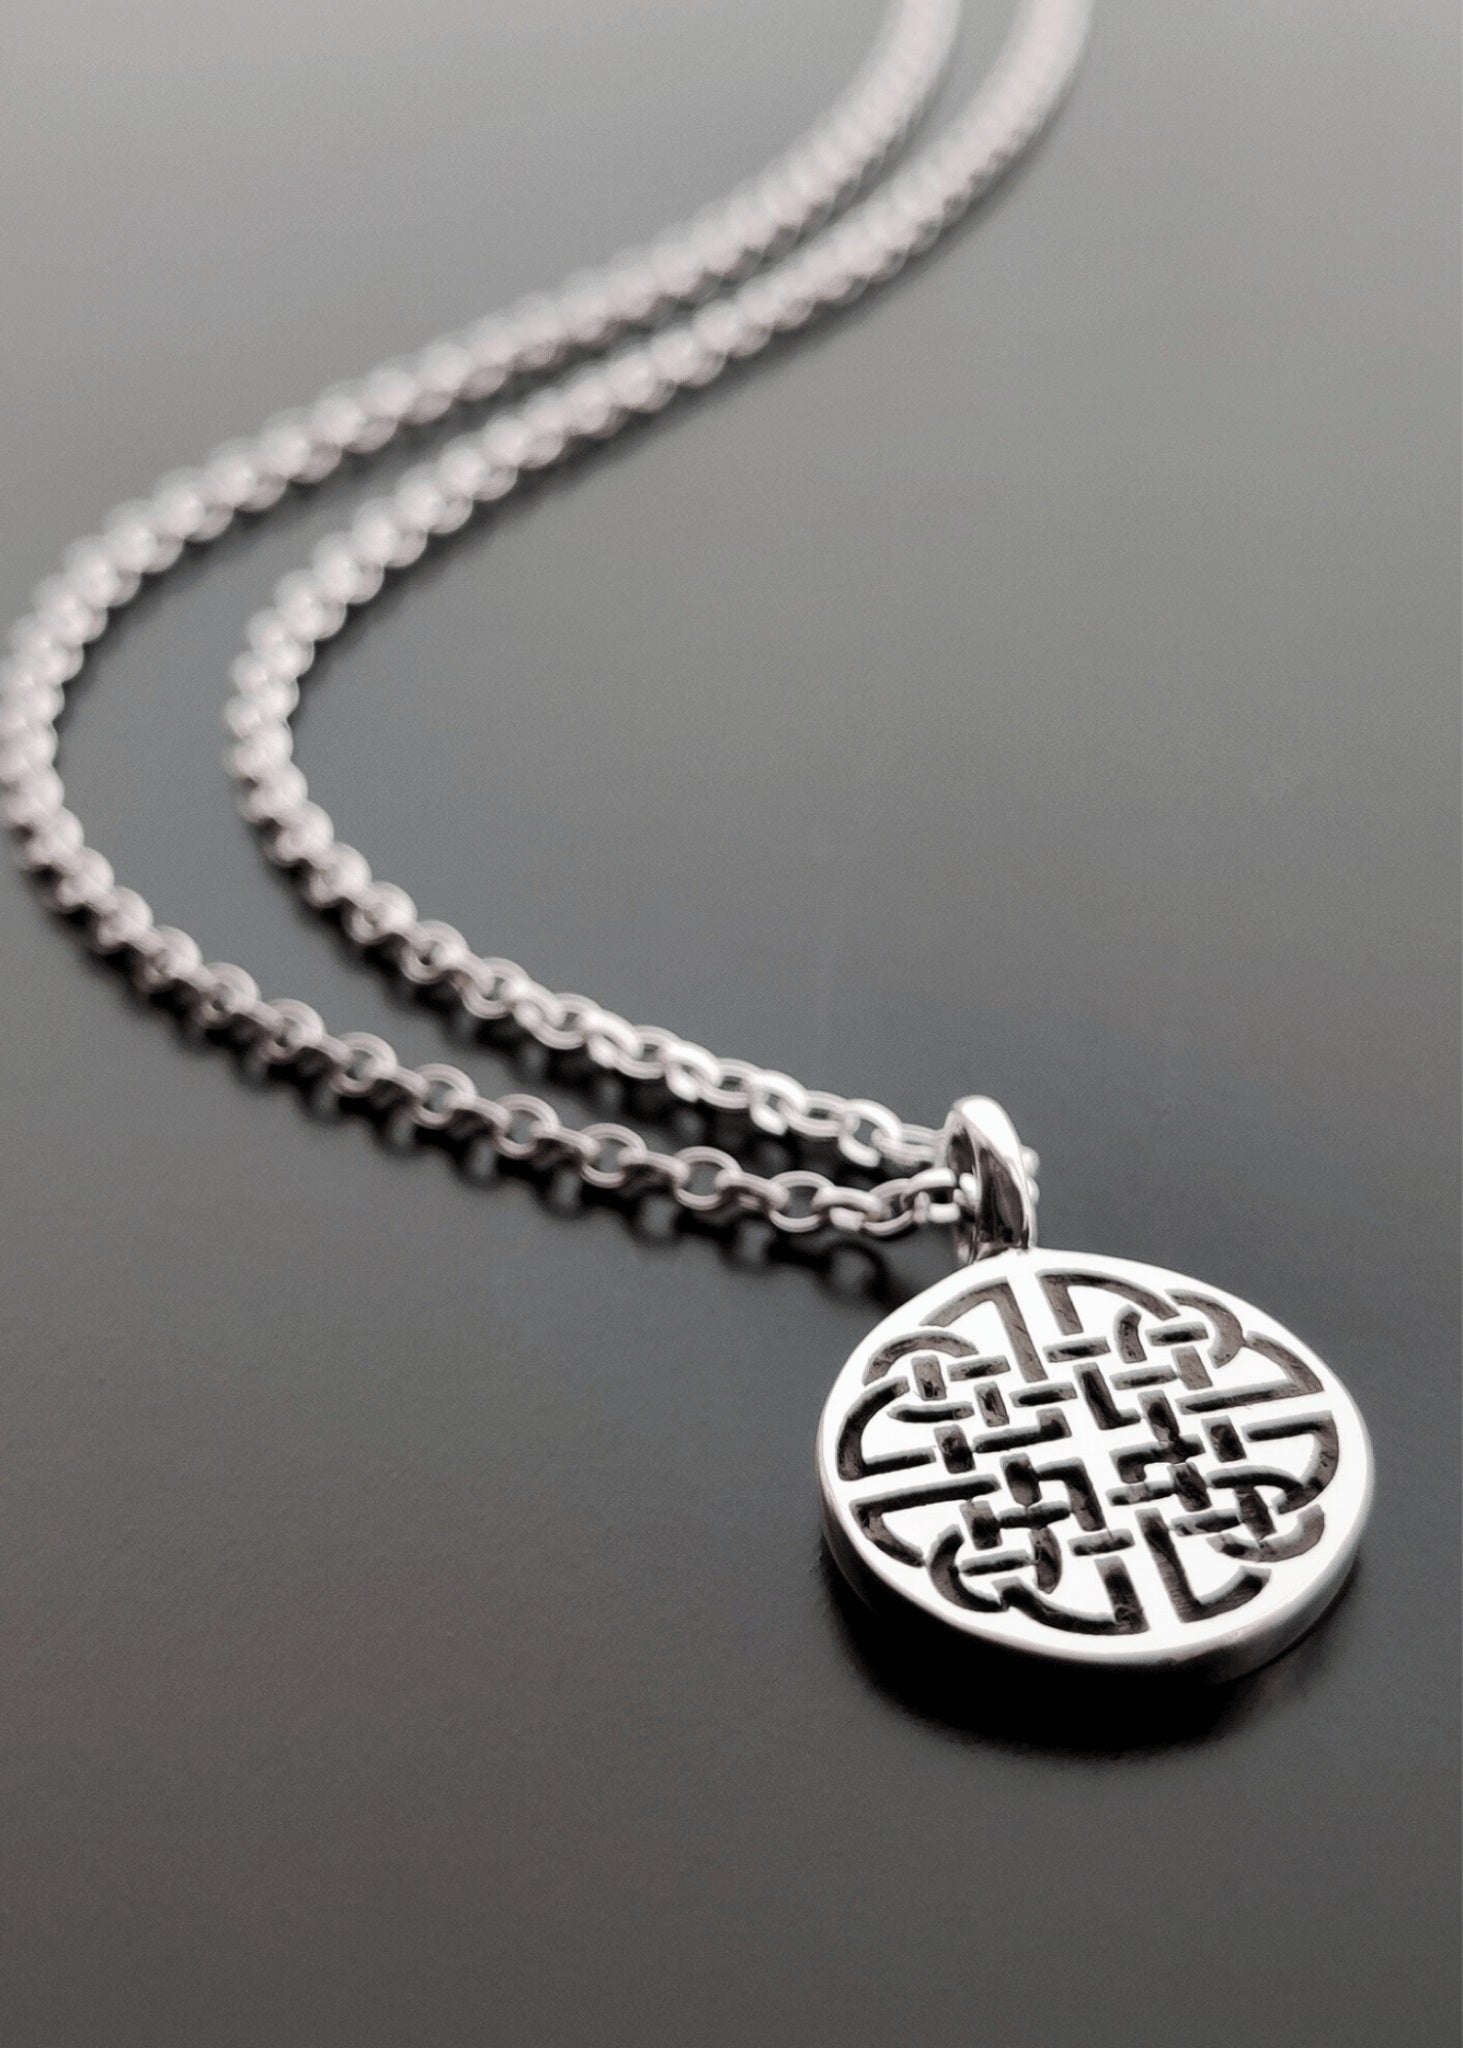 Knotted Celtic Pendant Dara Celtic Knot Pendant Necklace 925 Sterling  Silver Celtic Jewelry - Etsy | Celtic pendant, Celtic knot pendant, Celtic  jewelry